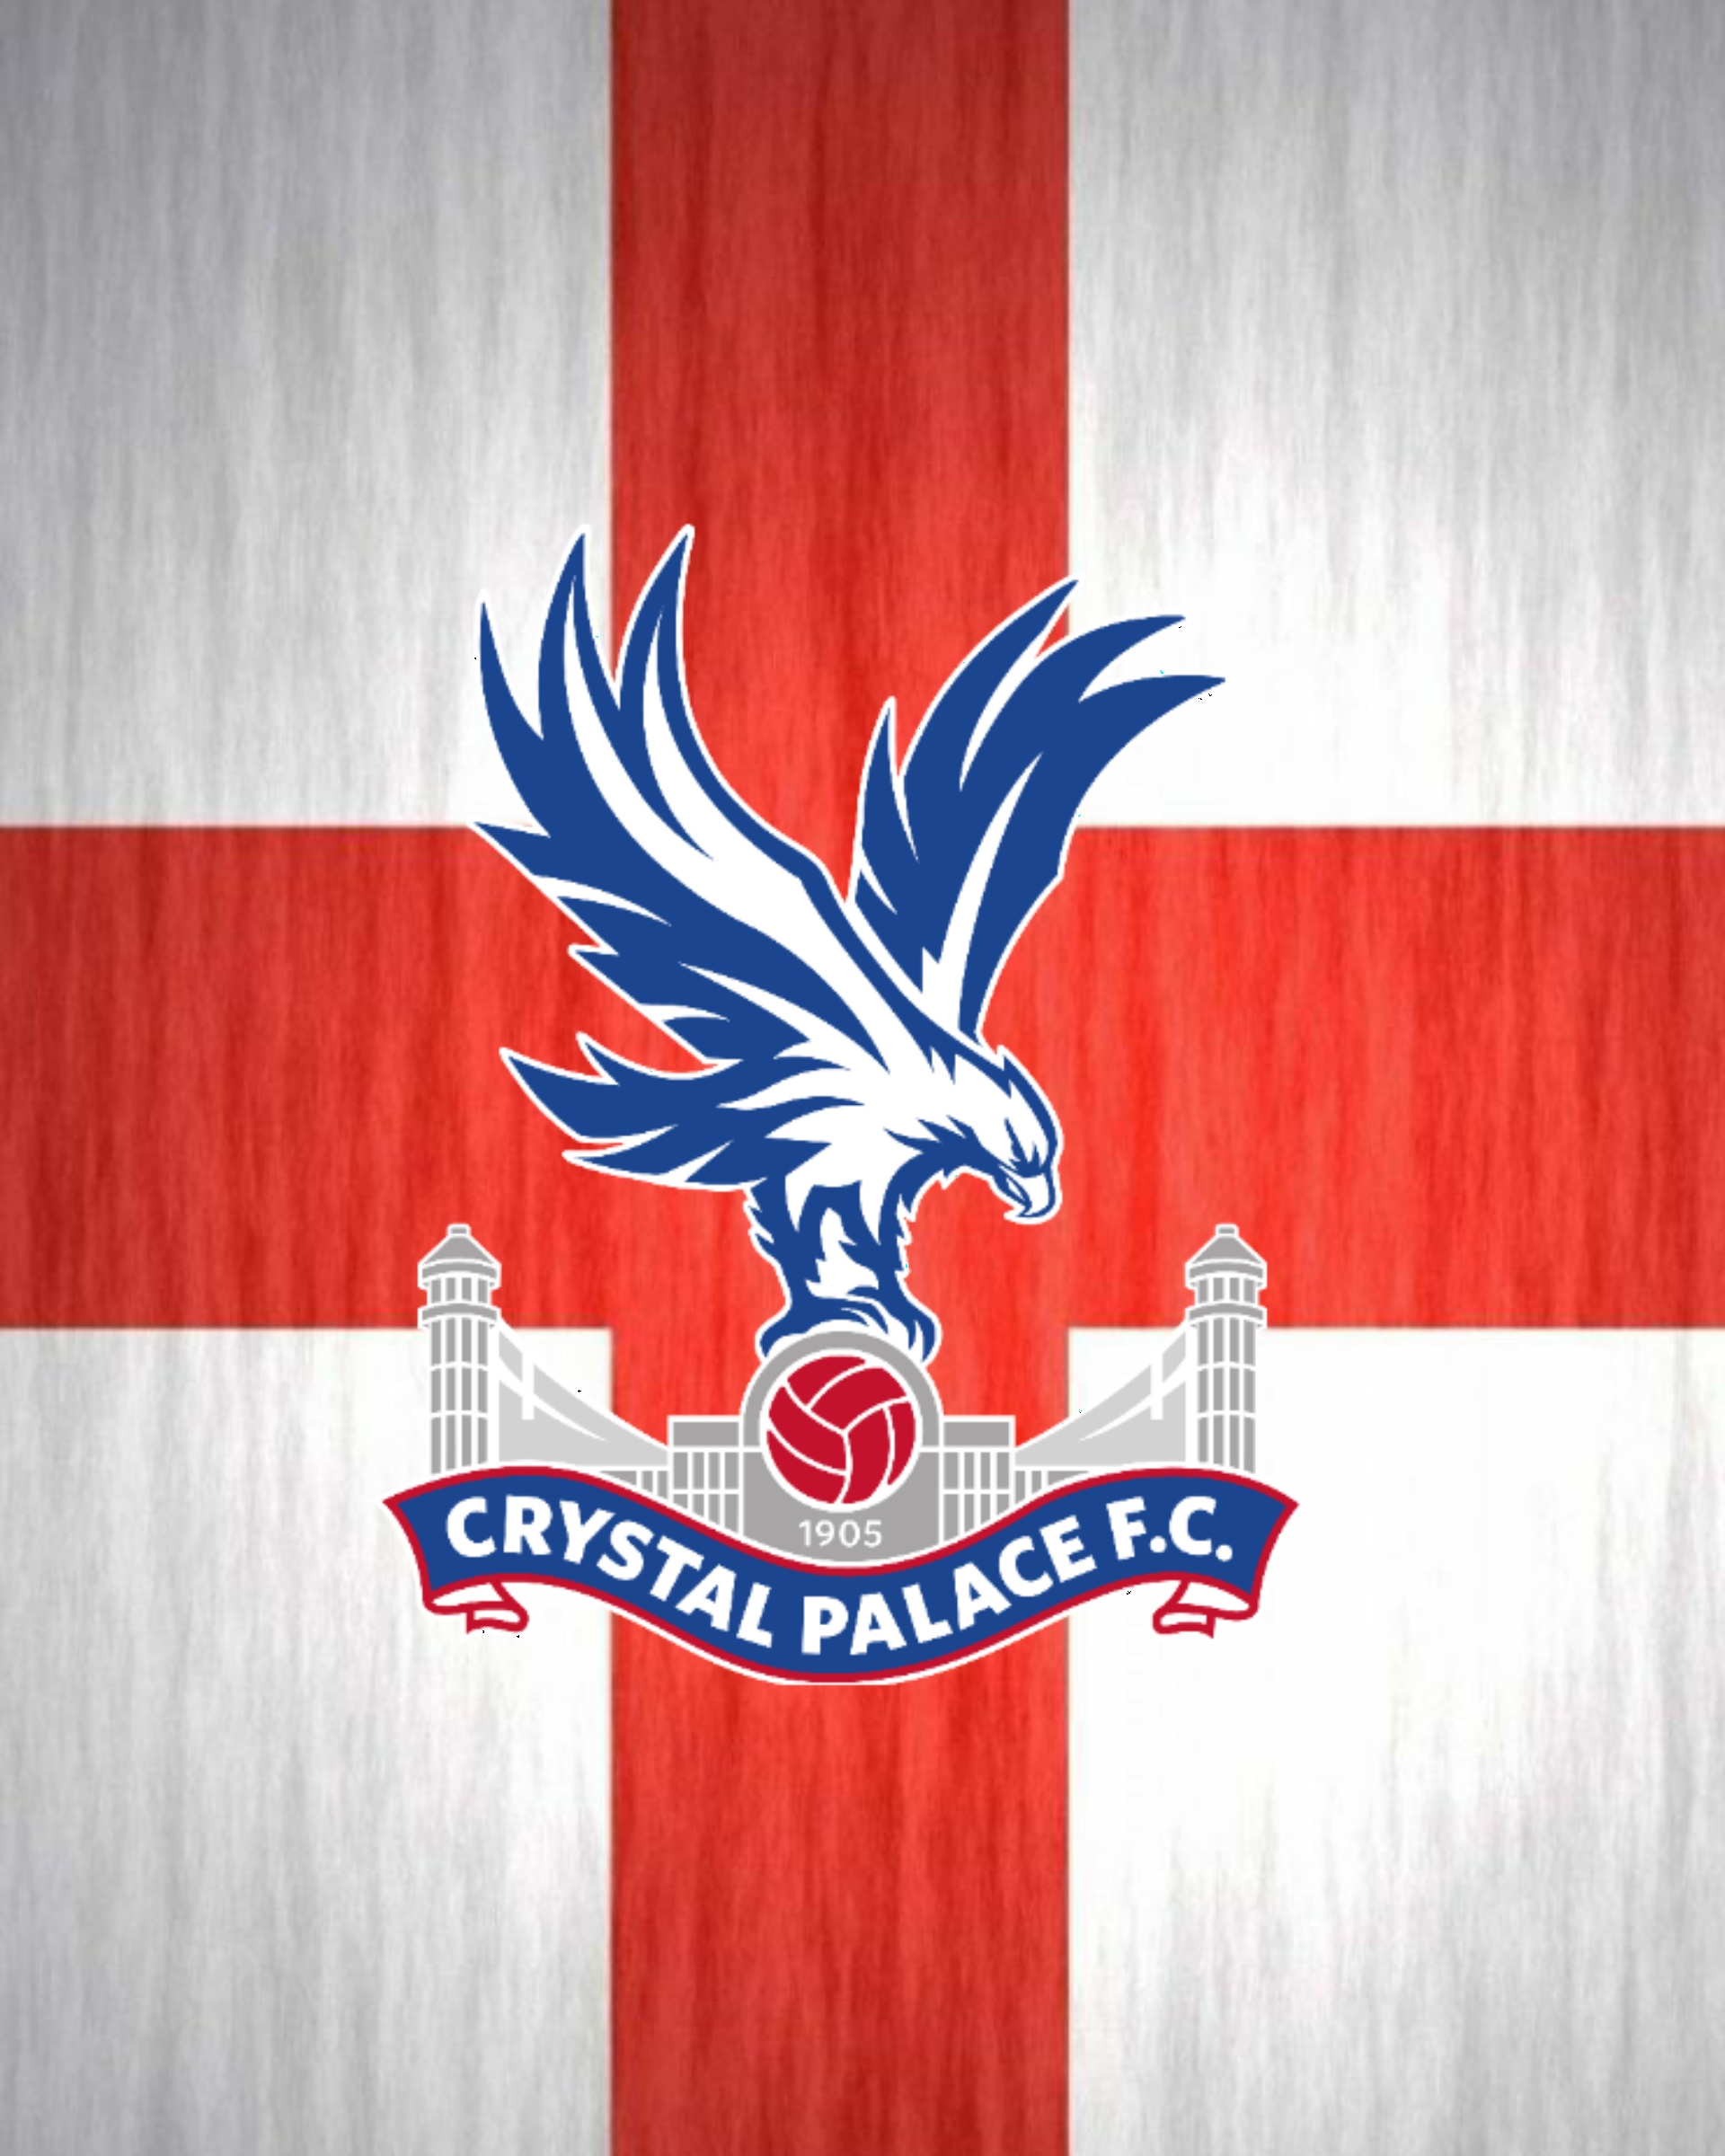 Crystal Palace F.C. Picture